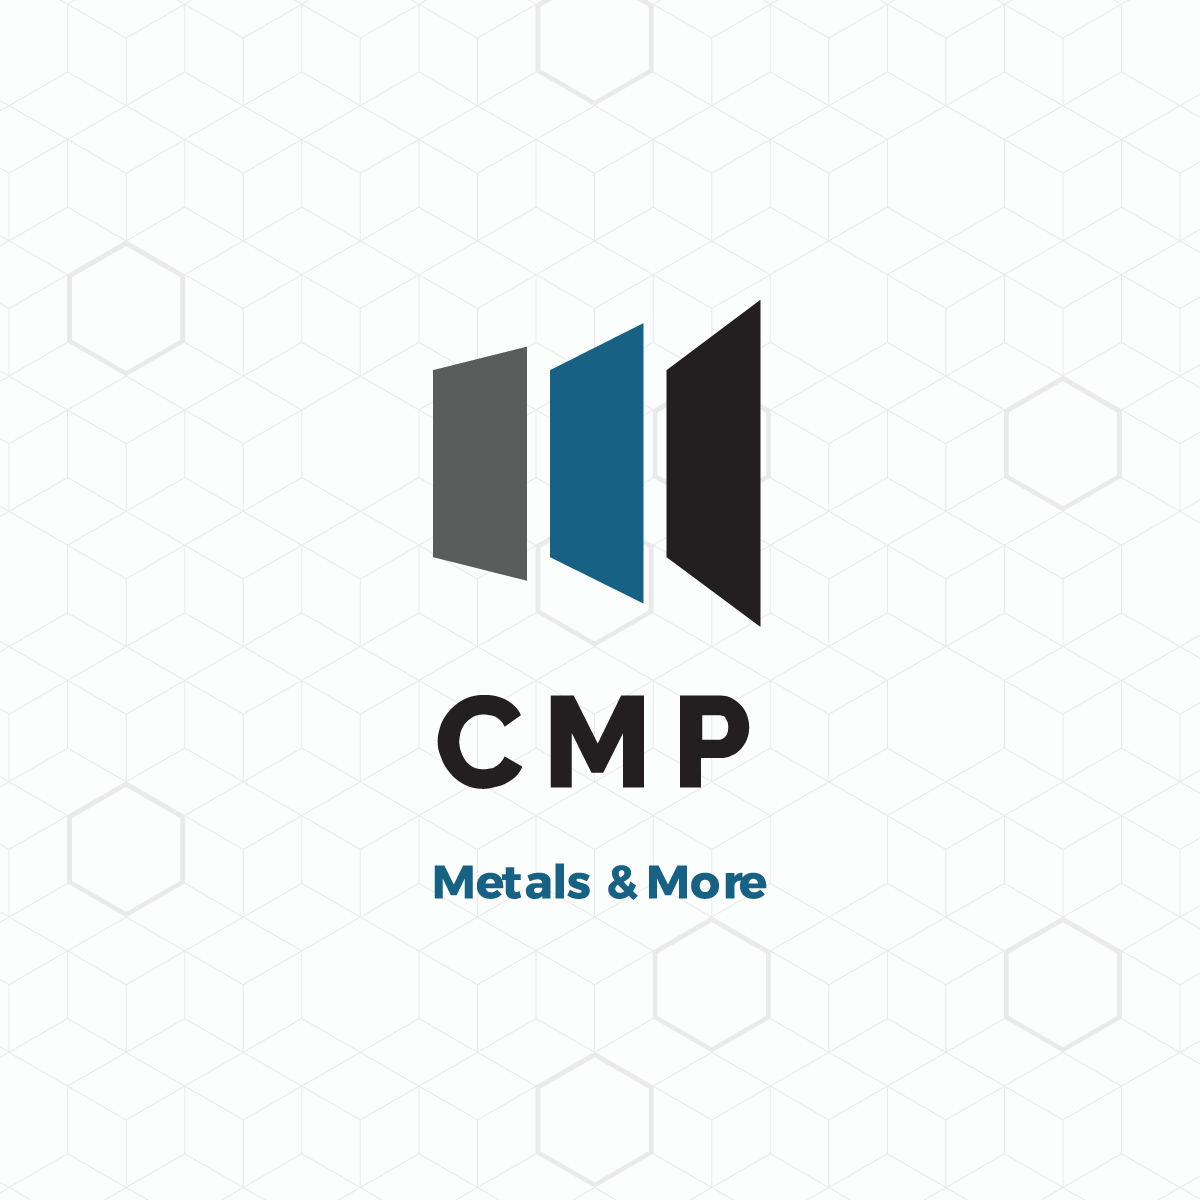 CMP metals and more